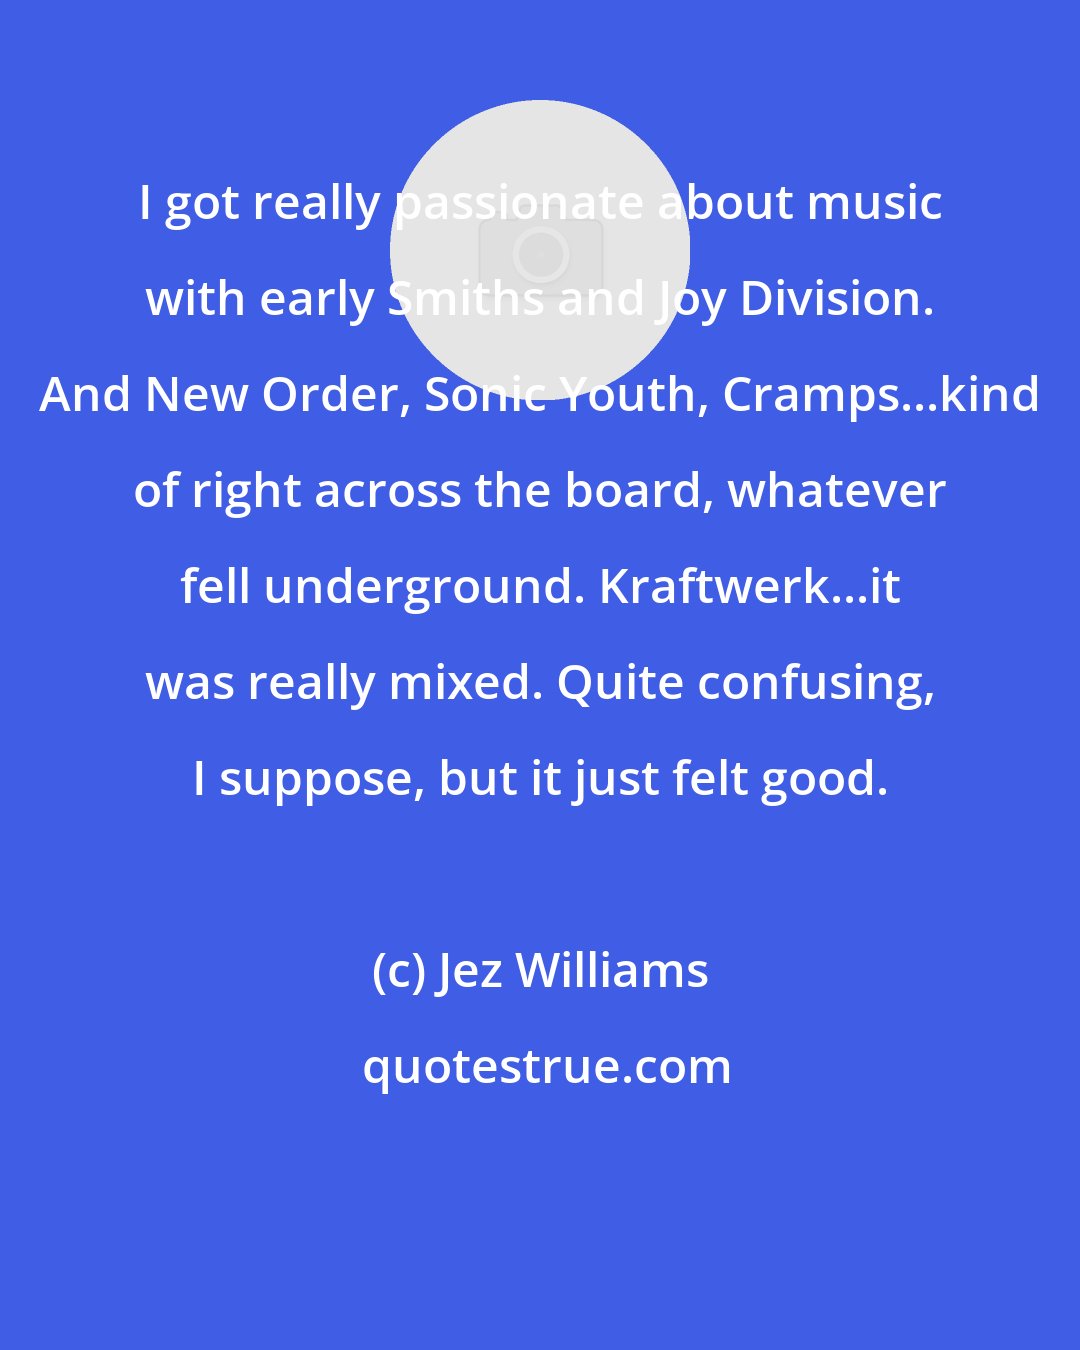 Jez Williams: I got really passionate about music with early Smiths and Joy Division. And New Order, Sonic Youth, Cramps...kind of right across the board, whatever fell underground. Kraftwerk...it was really mixed. Quite confusing, I suppose, but it just felt good.